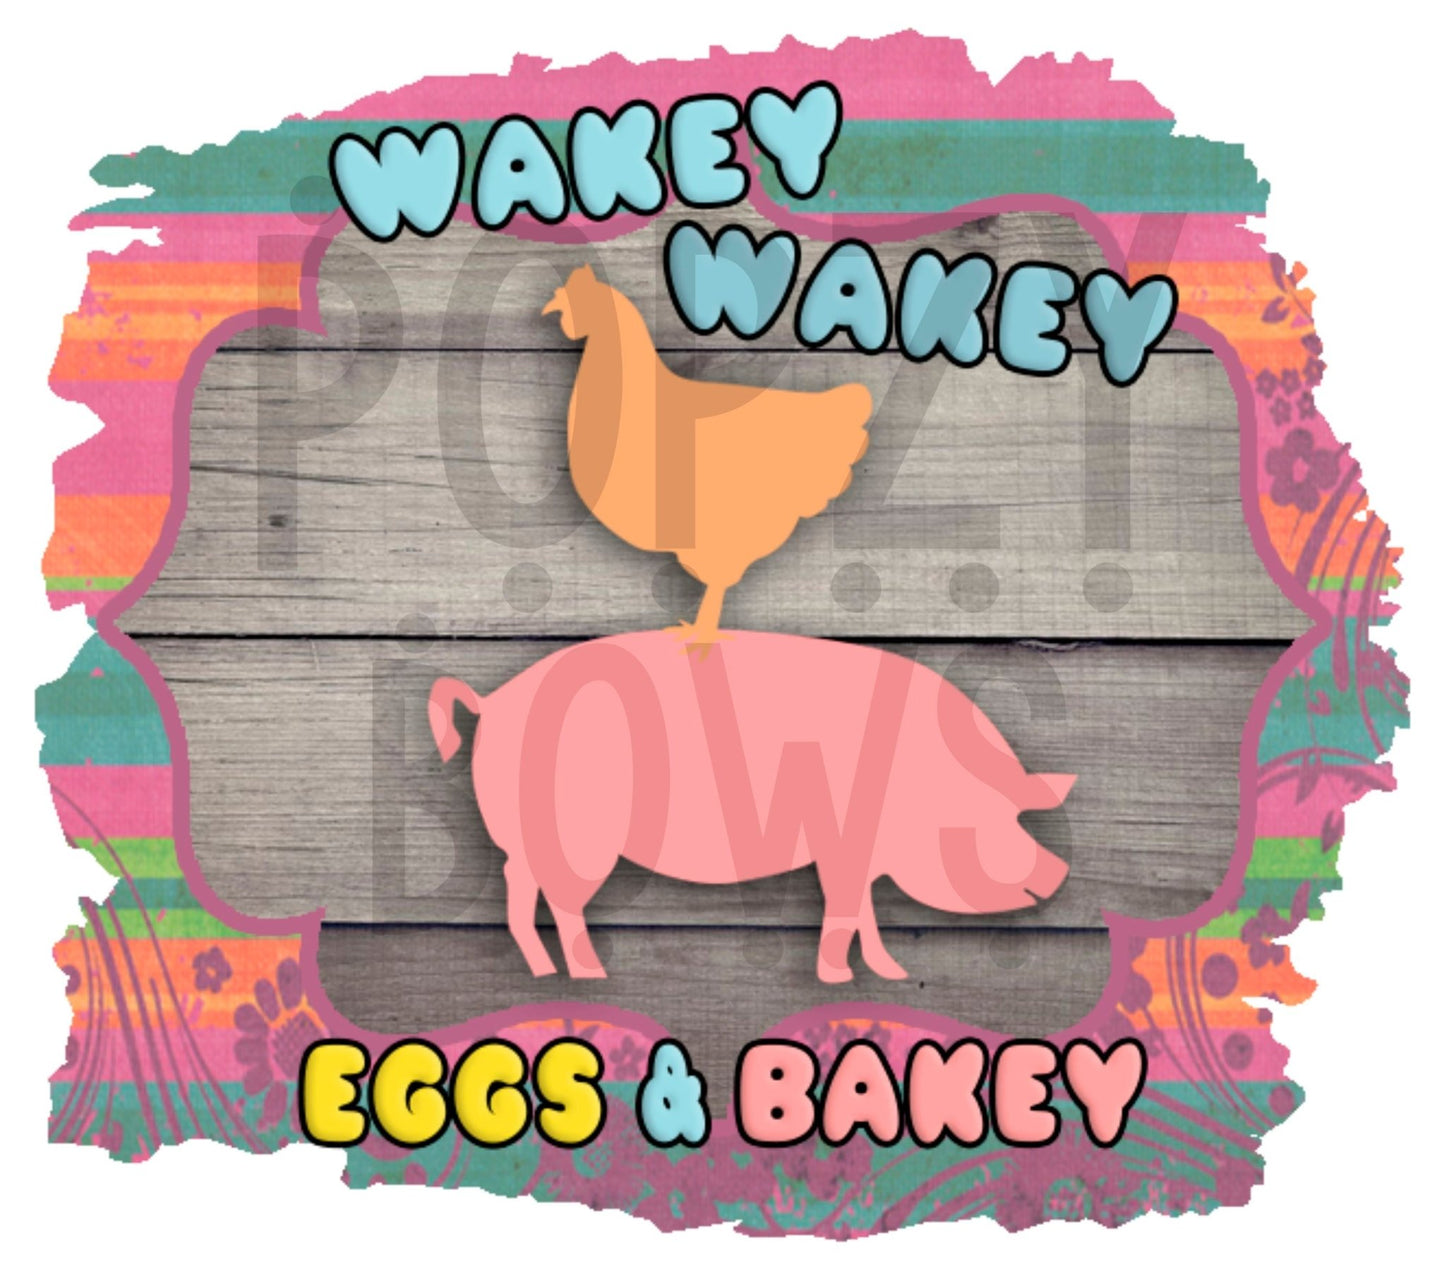 wakey wake eggs and bakey png Digital Download Instand Download - Do it yourself Transfers